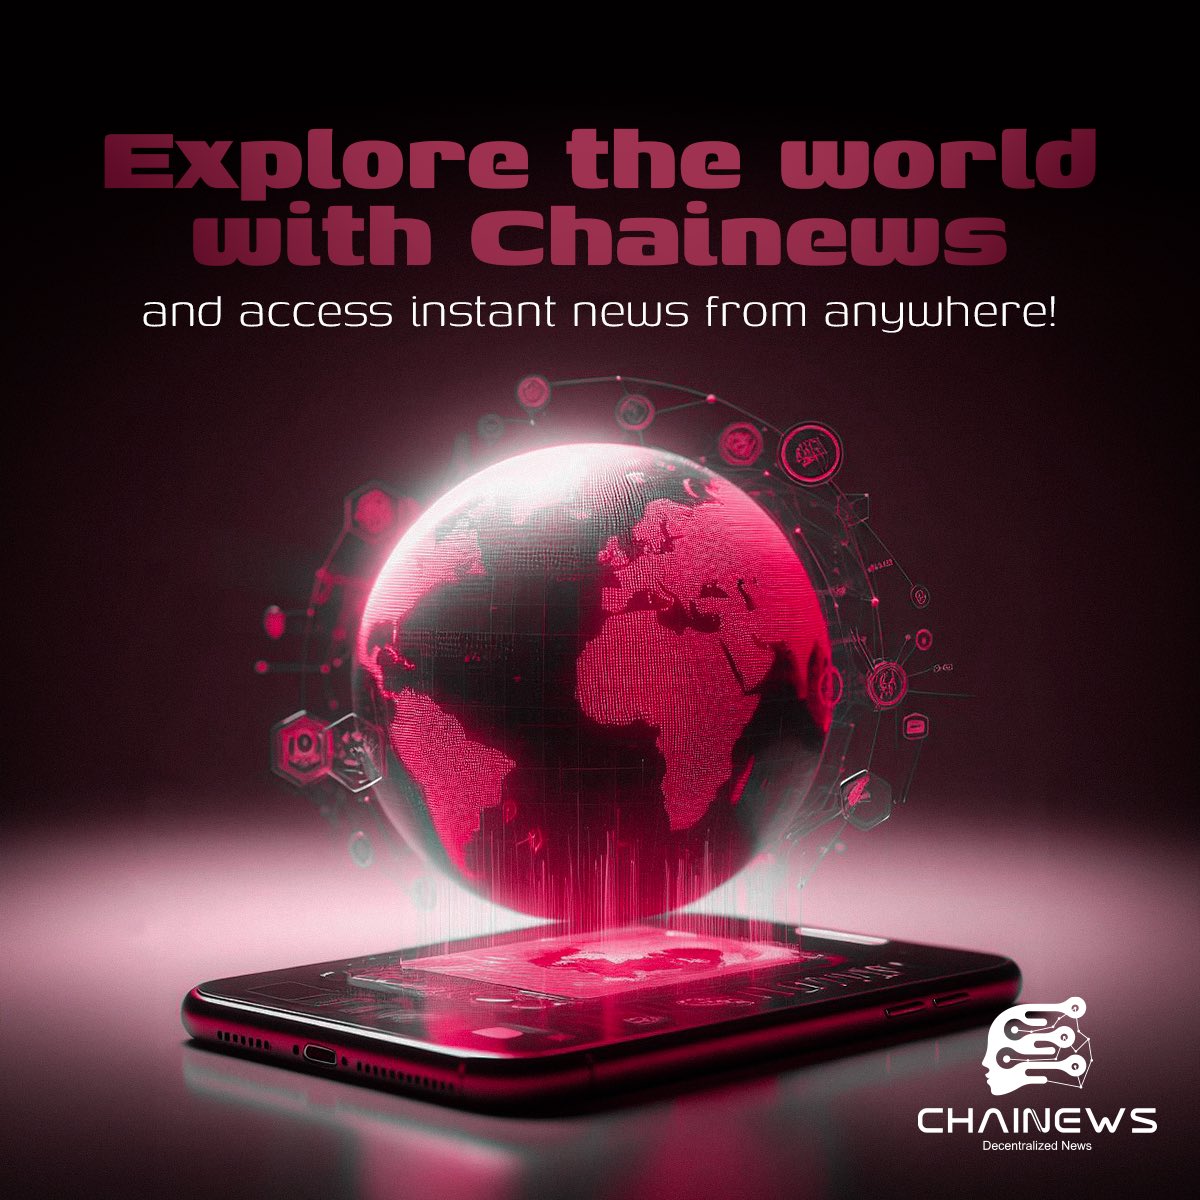 Explore the world with Chainews and access instant news from anywhere! #blockchain #blockchaintechnology #blockchainnews #blockchains #blockchainrevolution #blockchainconsulting #blockchainteam #blockchainfund #blockchaintech #blockchaincrypto #blockchaineum #chainews